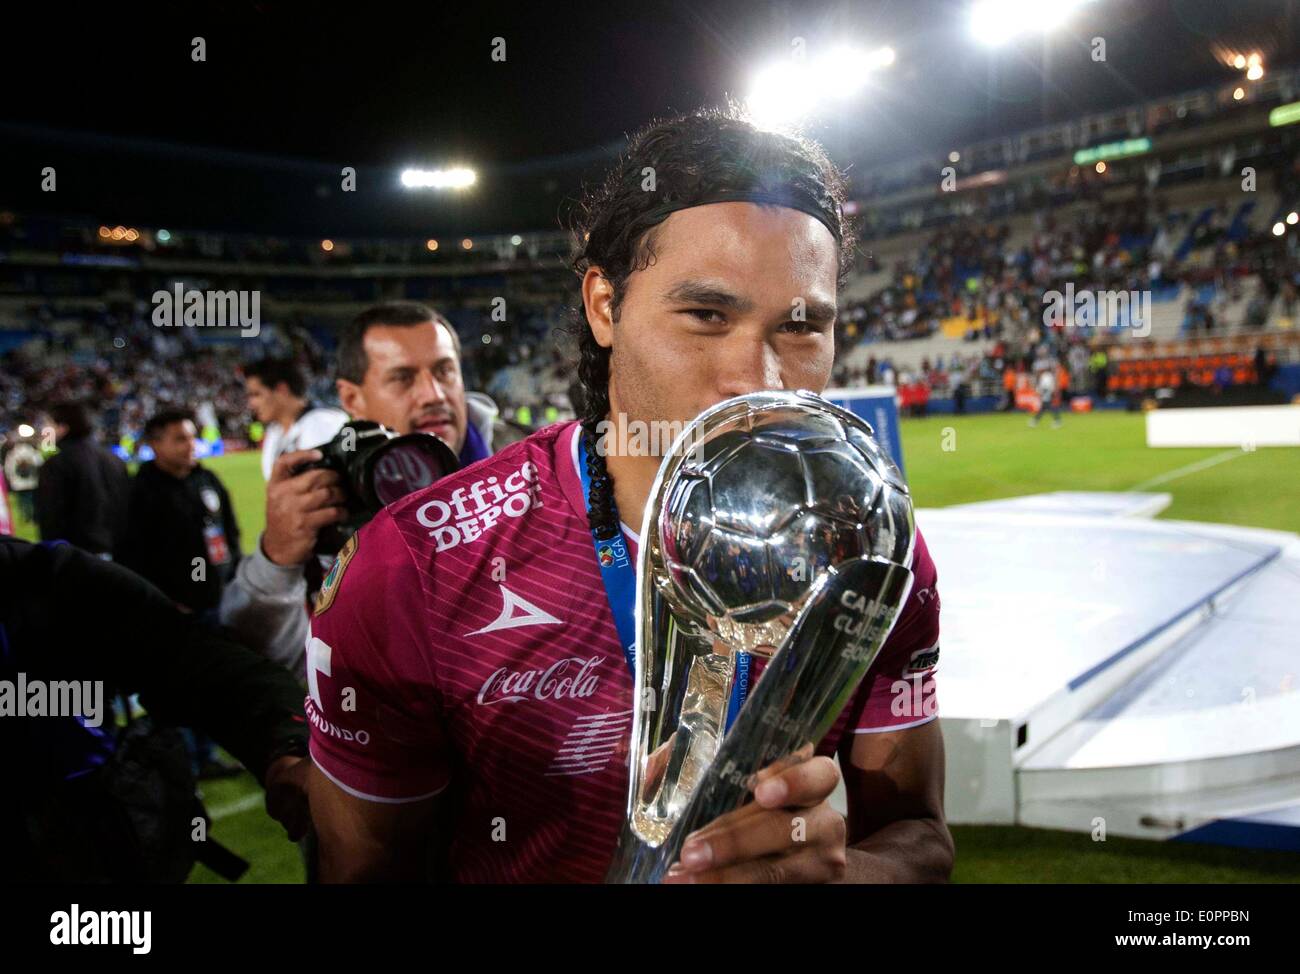 (140519) -- PACHUCA, May 19, 2014 (Xinhua) -- Leon's Carlos Pena (Front) kisses the trophy after defeating Pachuca at the final match of the 2014 Mexican Clausura Tournament at the Hidalgo Stadium in Pachuca, Mexico, on May 18, 2014. (Xinhua/Pedro Mera) (rt) Stock Photo